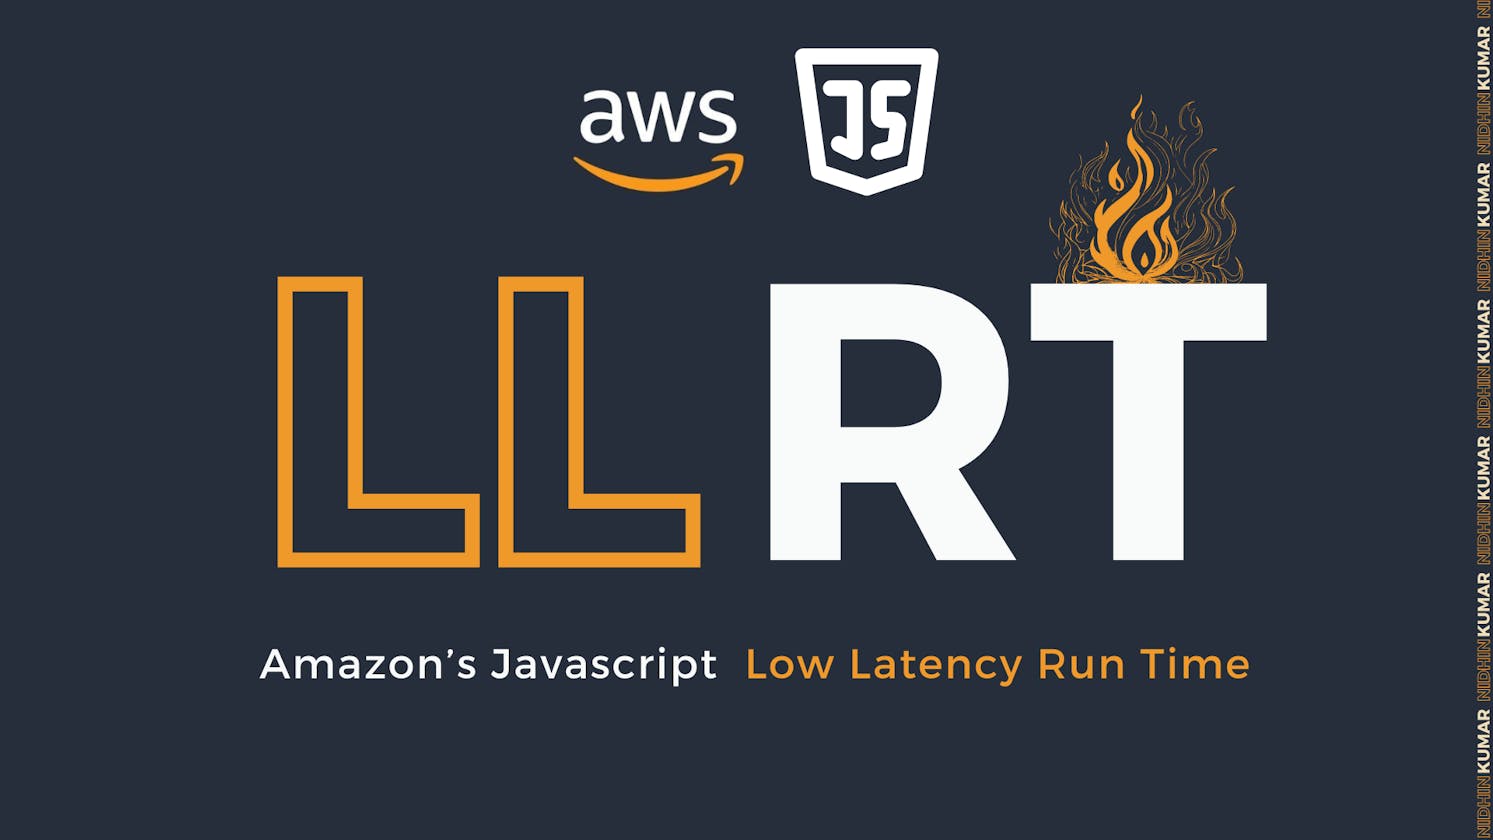 LLRT: Amazon's Low Latency RunTime for  JavaScript Environments.